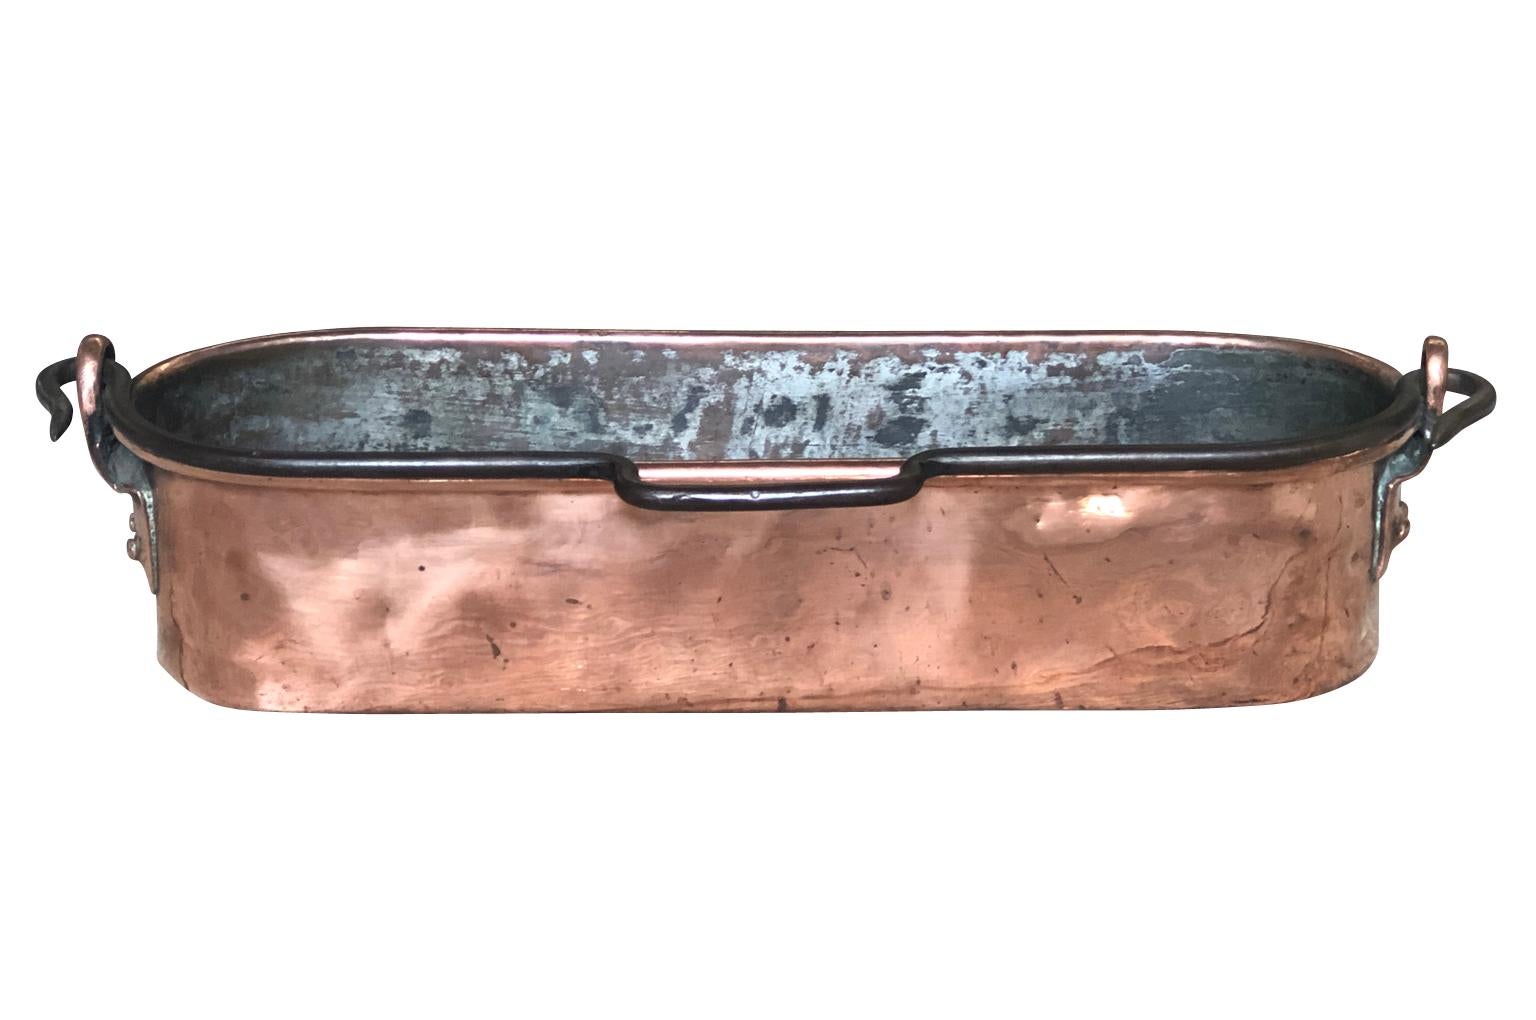 A very handsome early 19th century fish pan beautifully crafted from heavy gauge copper from the Provence region of France. A lovely accent piece for any kitchen, bathroom or table top.